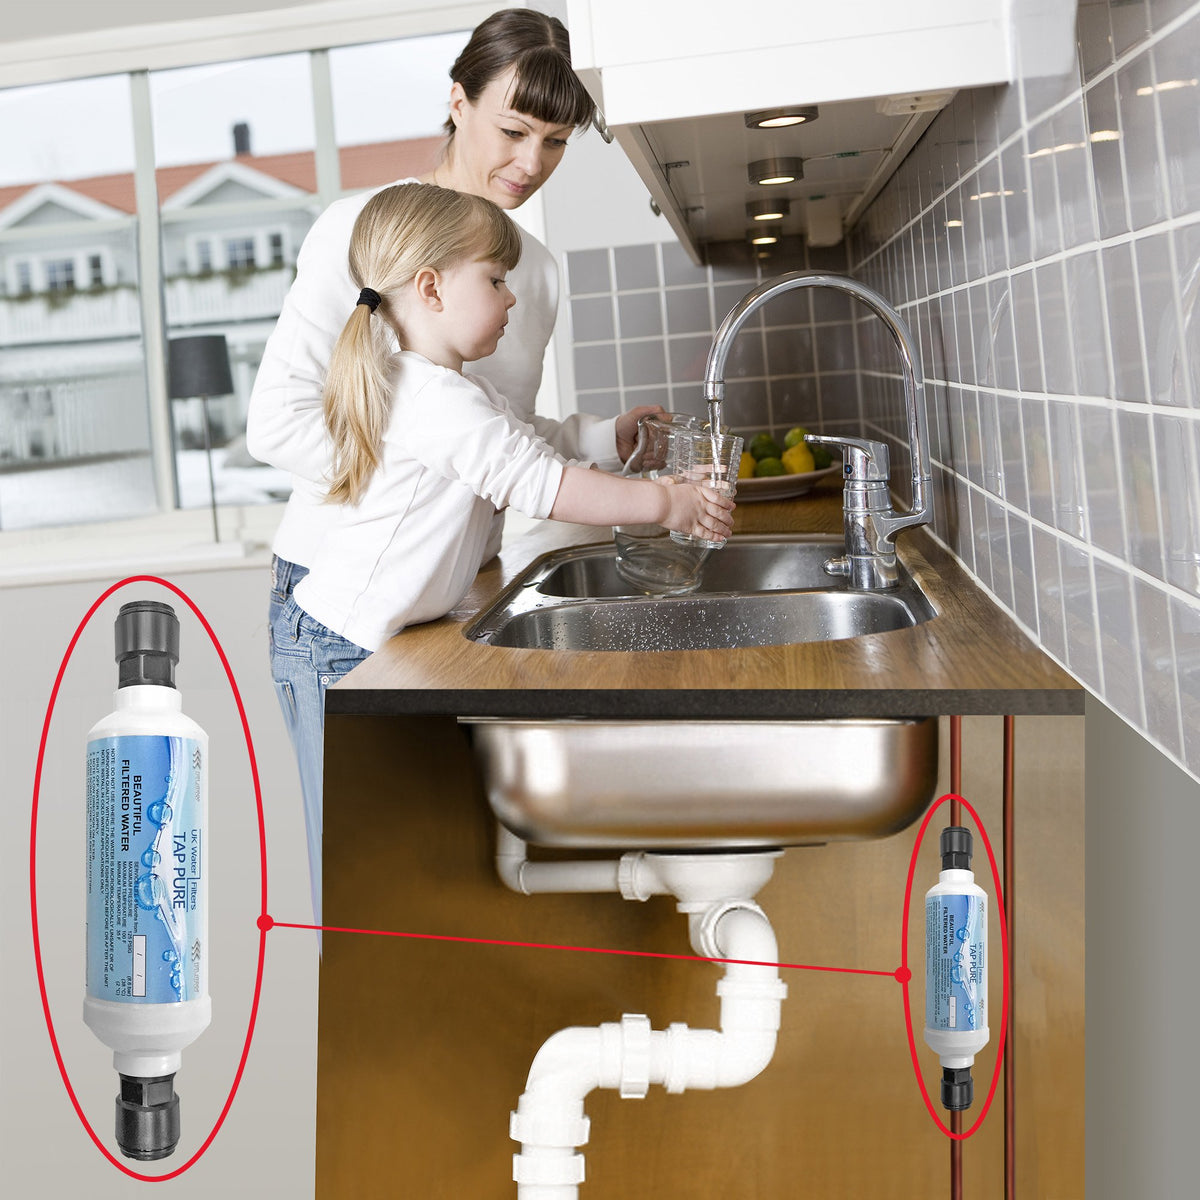 Troubleshooting a leak in your TAPP Water filter fitting 